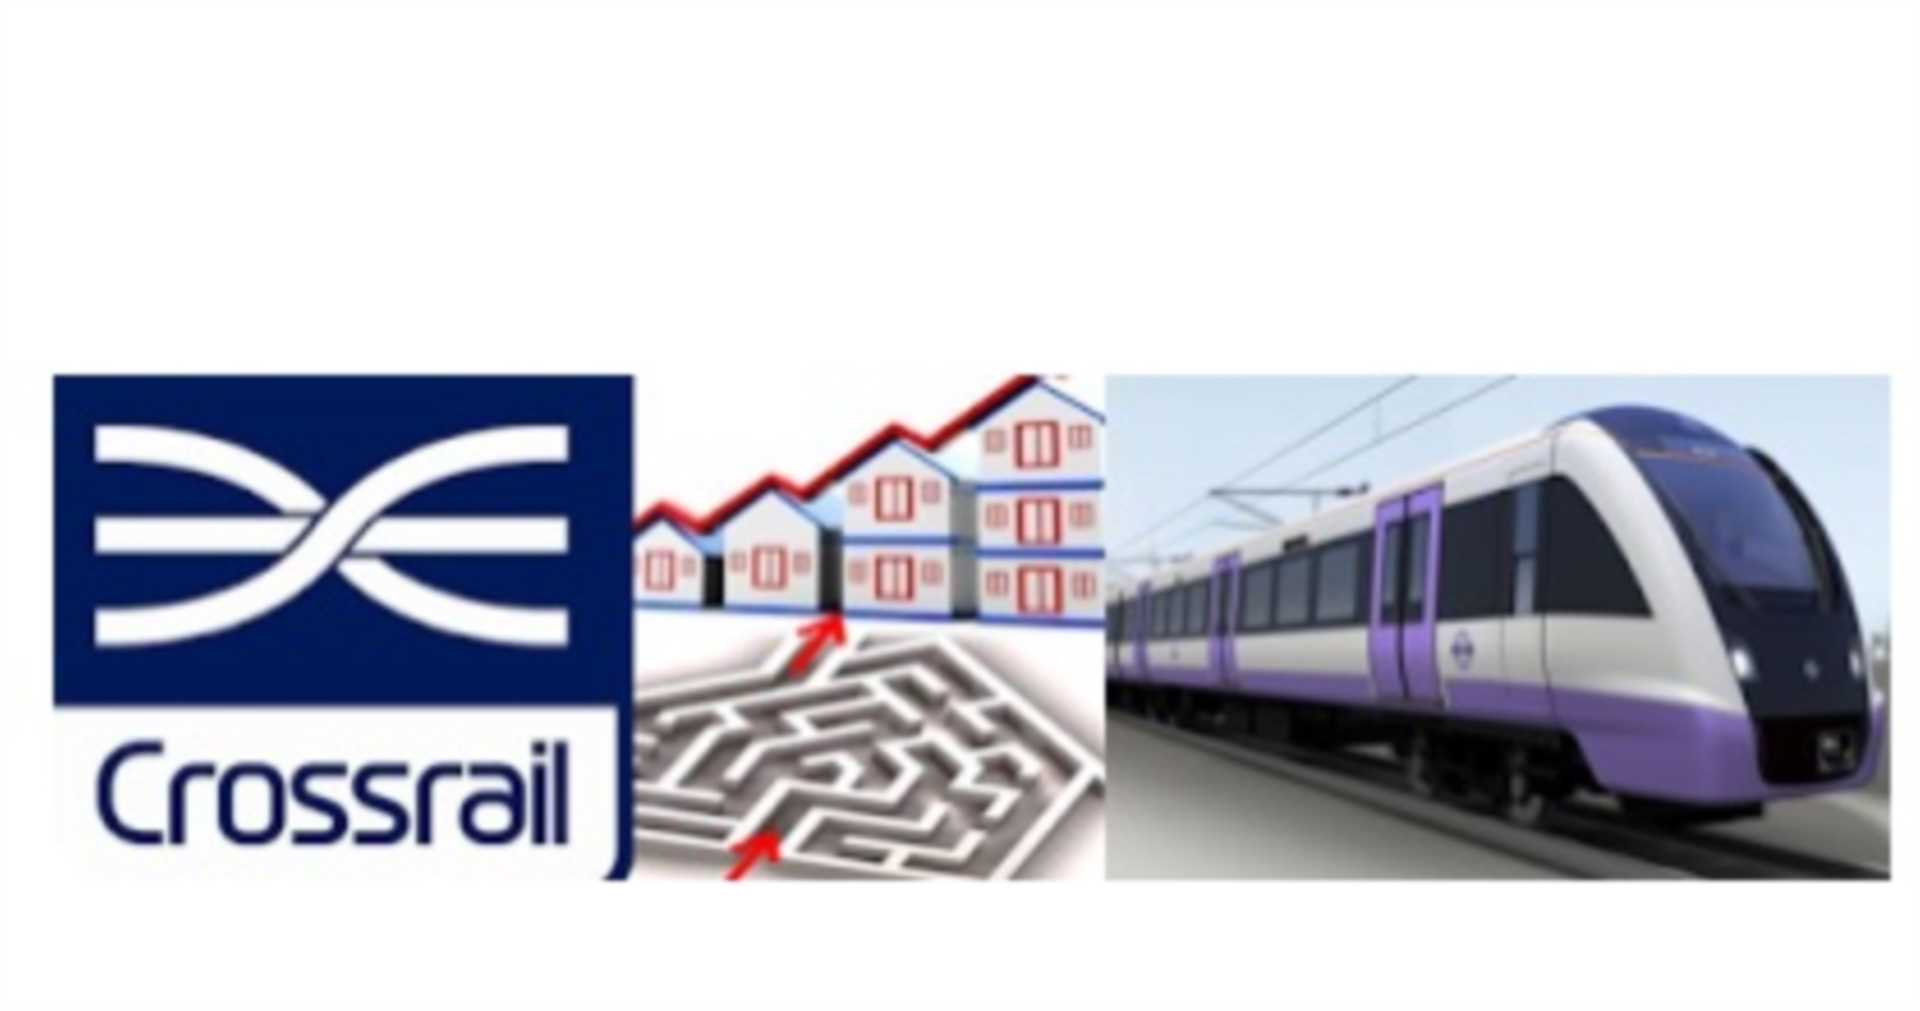 Crossrail arriving near Marylebone by 2018! What will this new service provide and how will it influence future investment choices, as well as the property market as a whole?